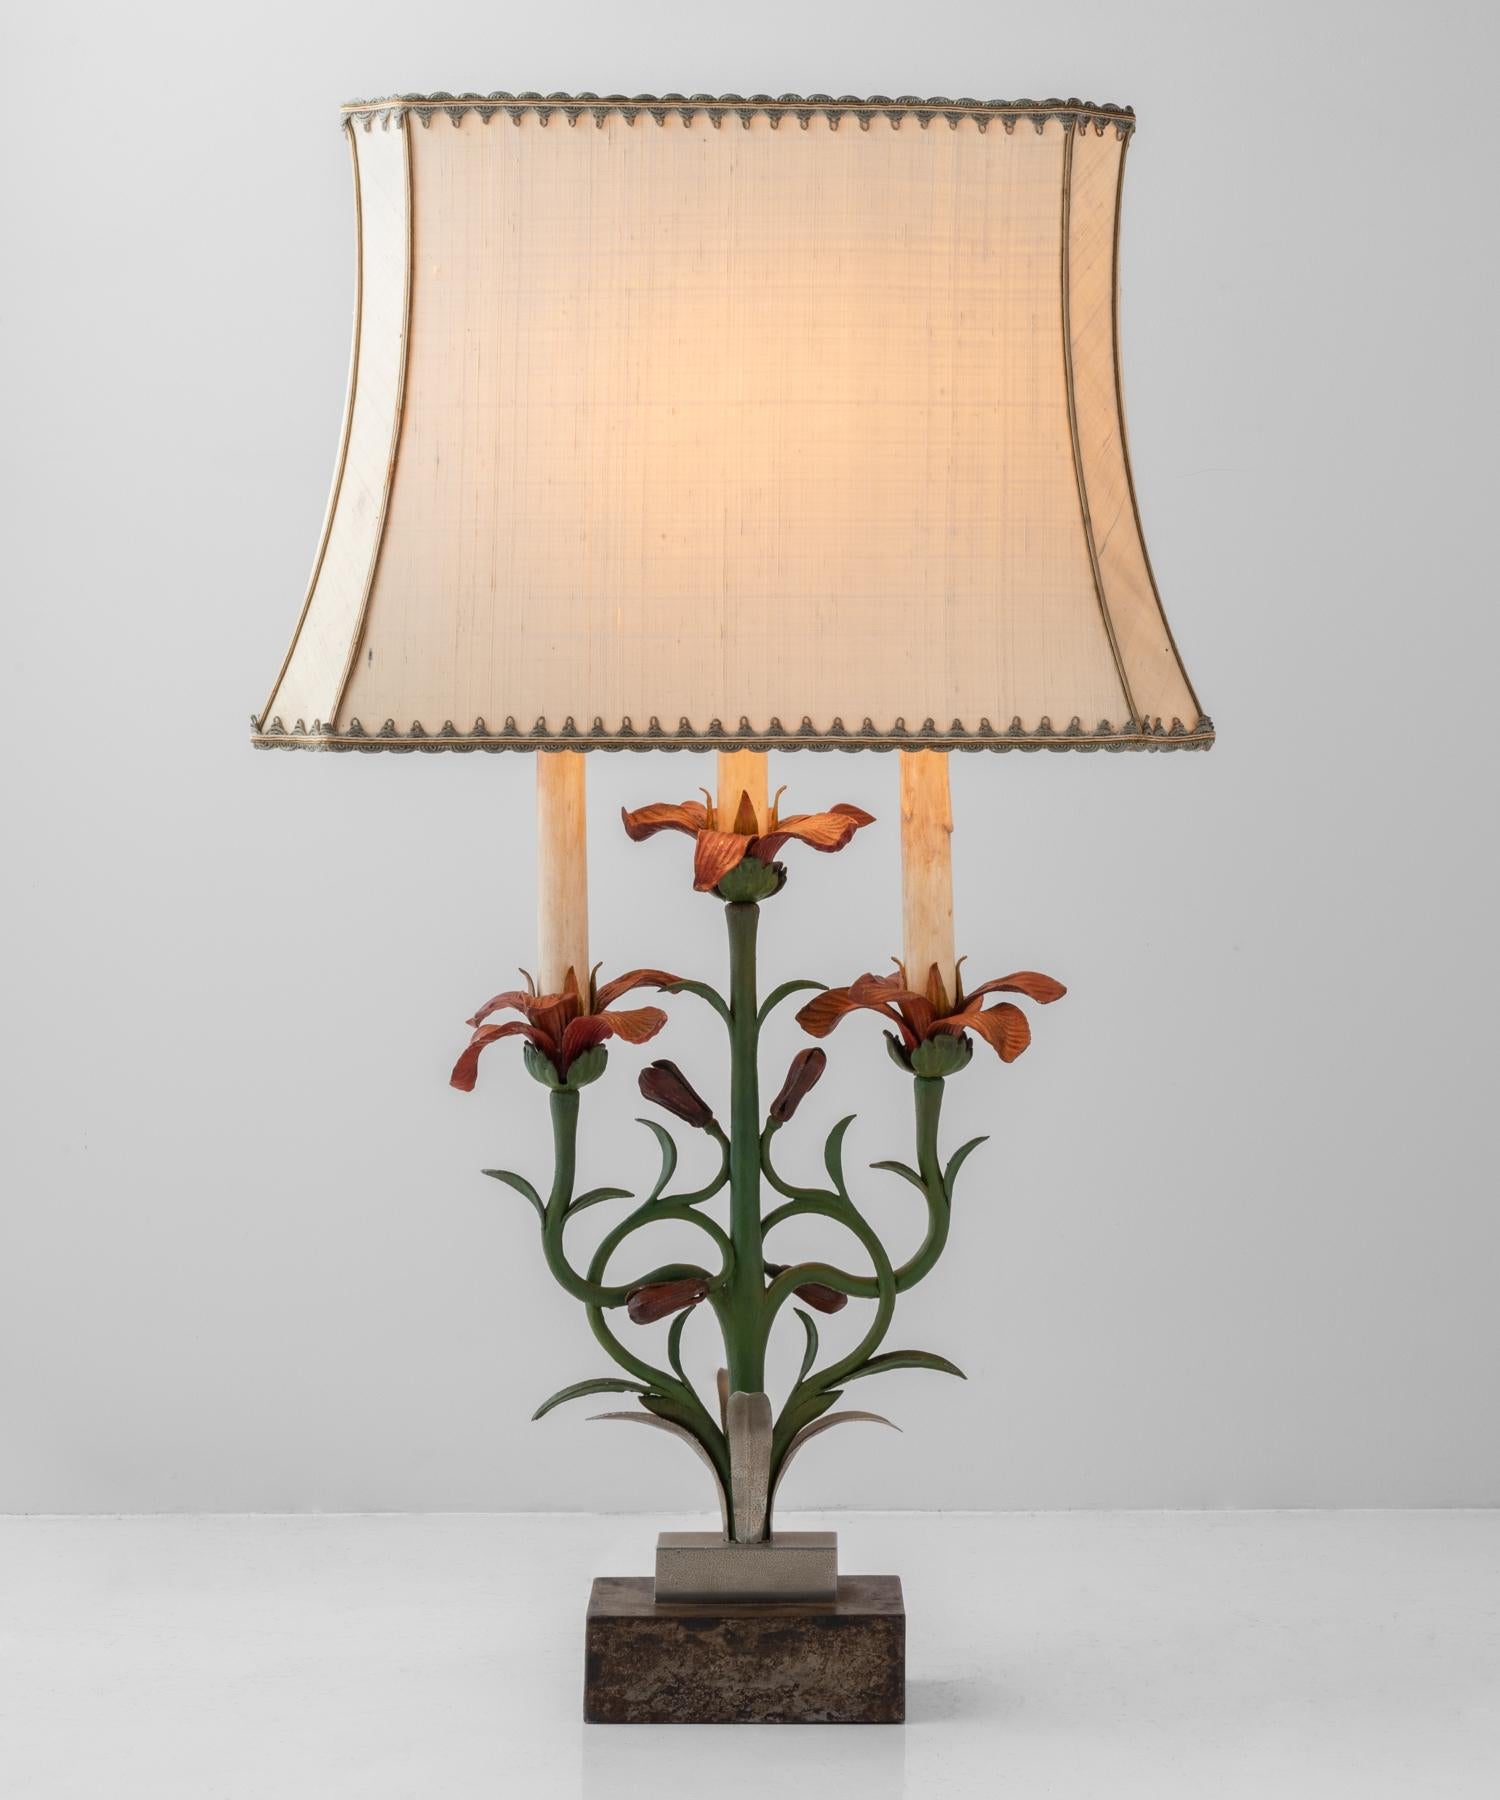 Painted floral cast iron table lamp, Italy, circa 1900.

Painted cast iron with unique detailing and original shade.